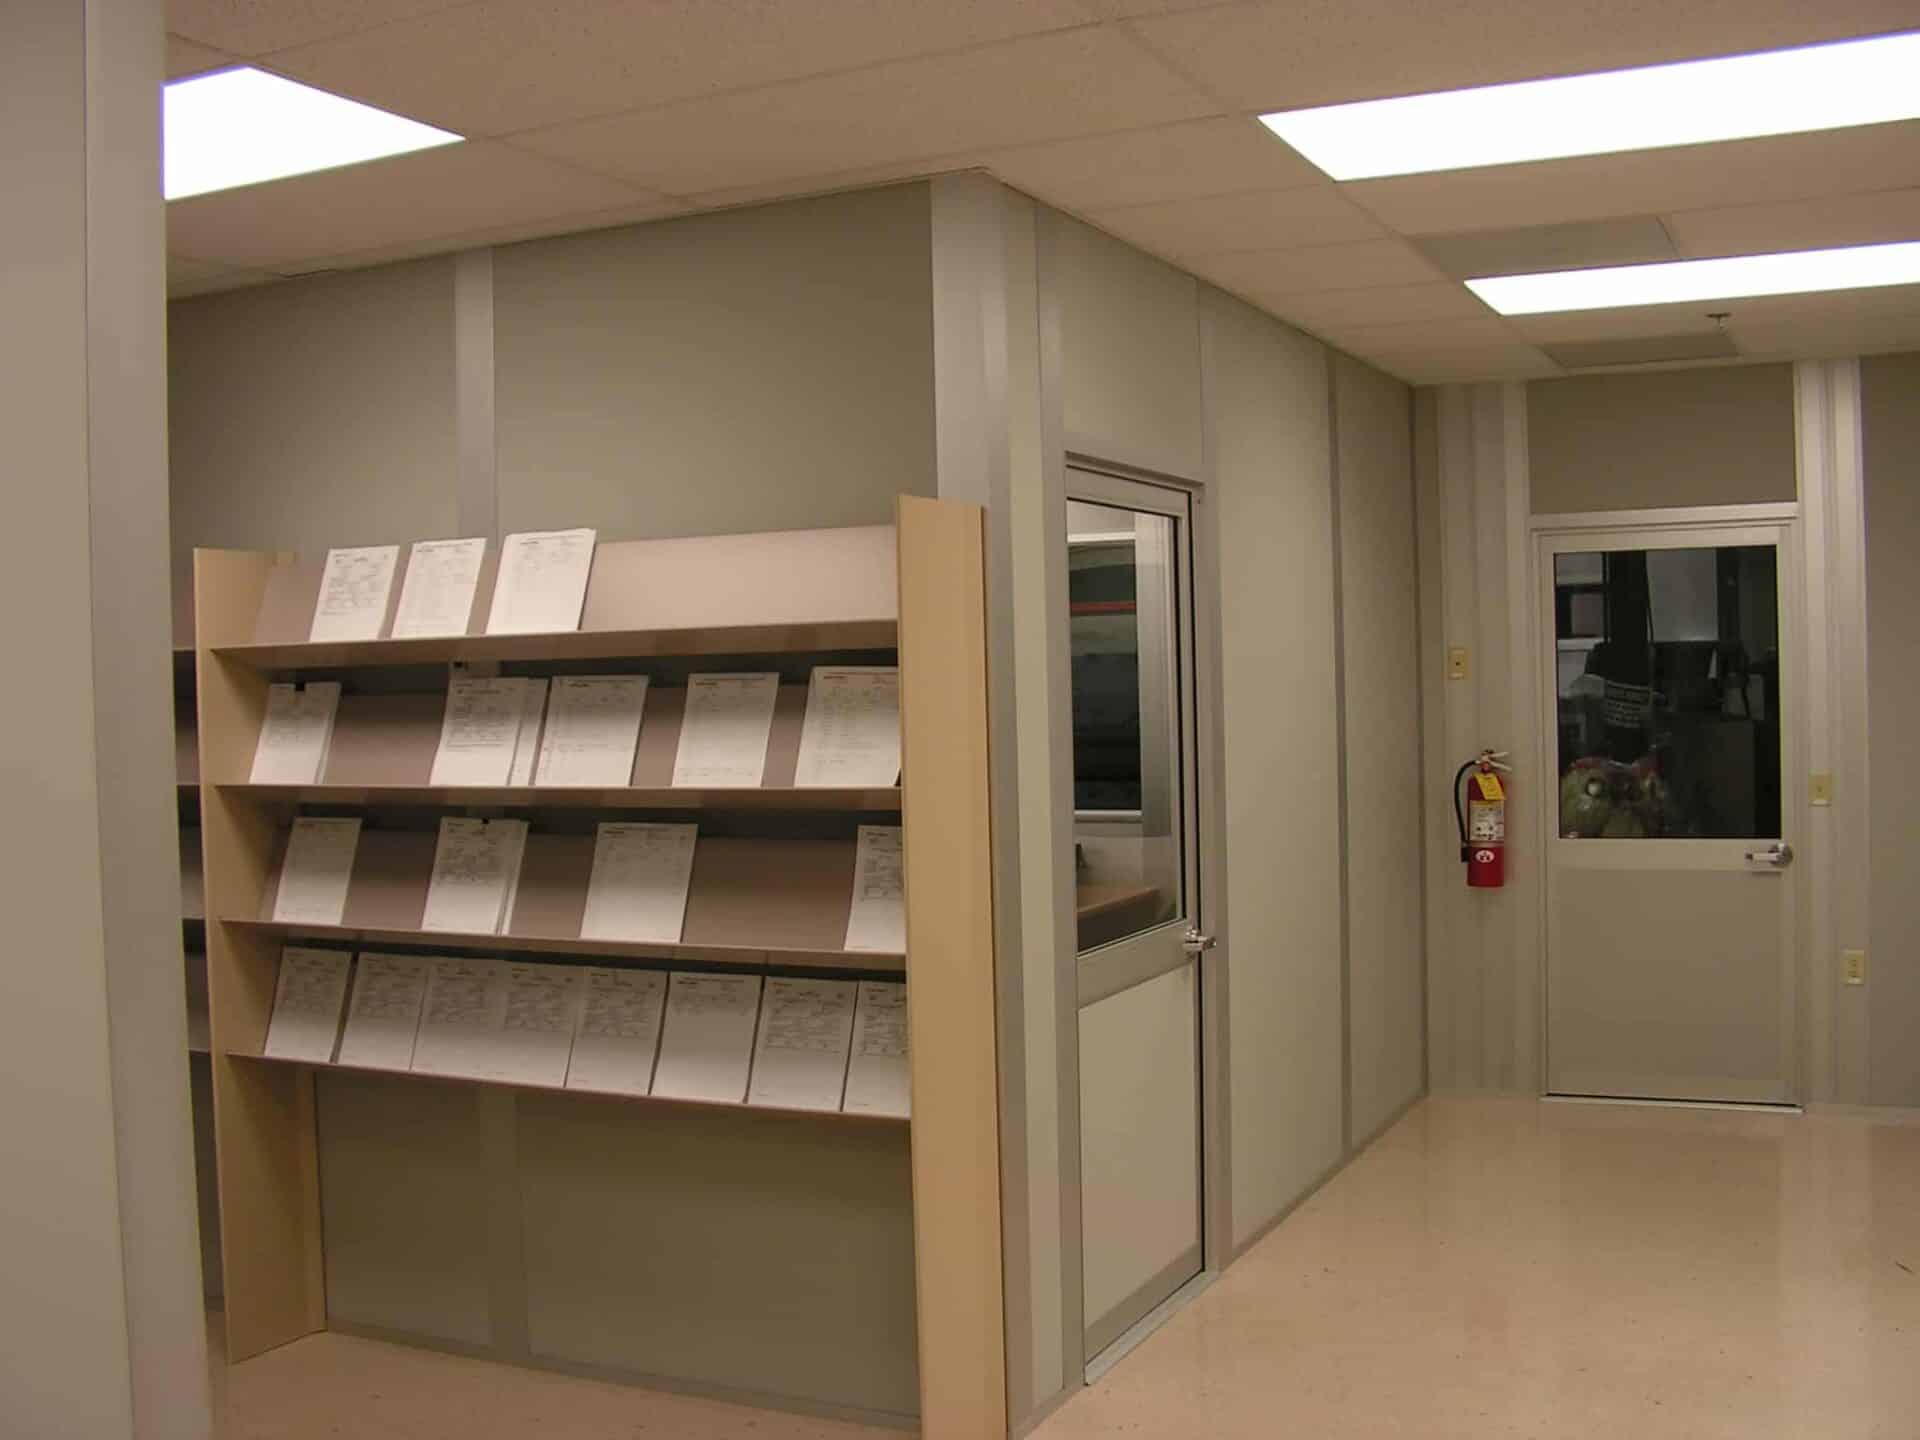 A clean, well-lit office corner in the new wing of the hospital with a large shelf filled with neatly organized documents. There's a glass door on the right and a fire extinguisher mounted on